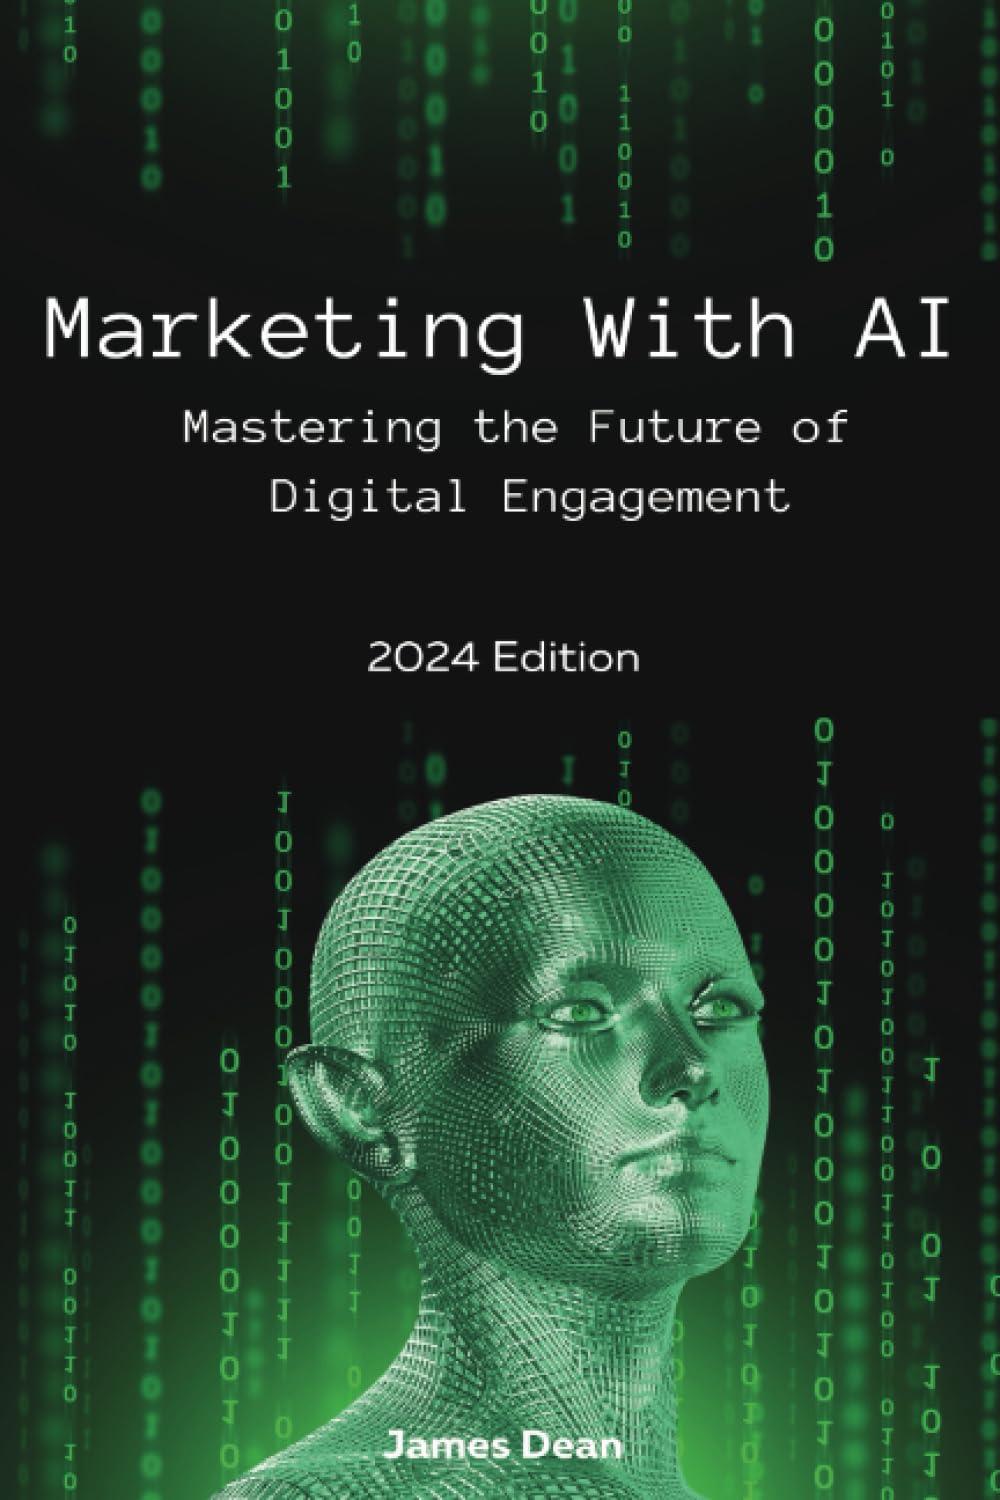 marketing with ai mastering the future of digital engagement 2024 edition james dean b0cj45pf4x,